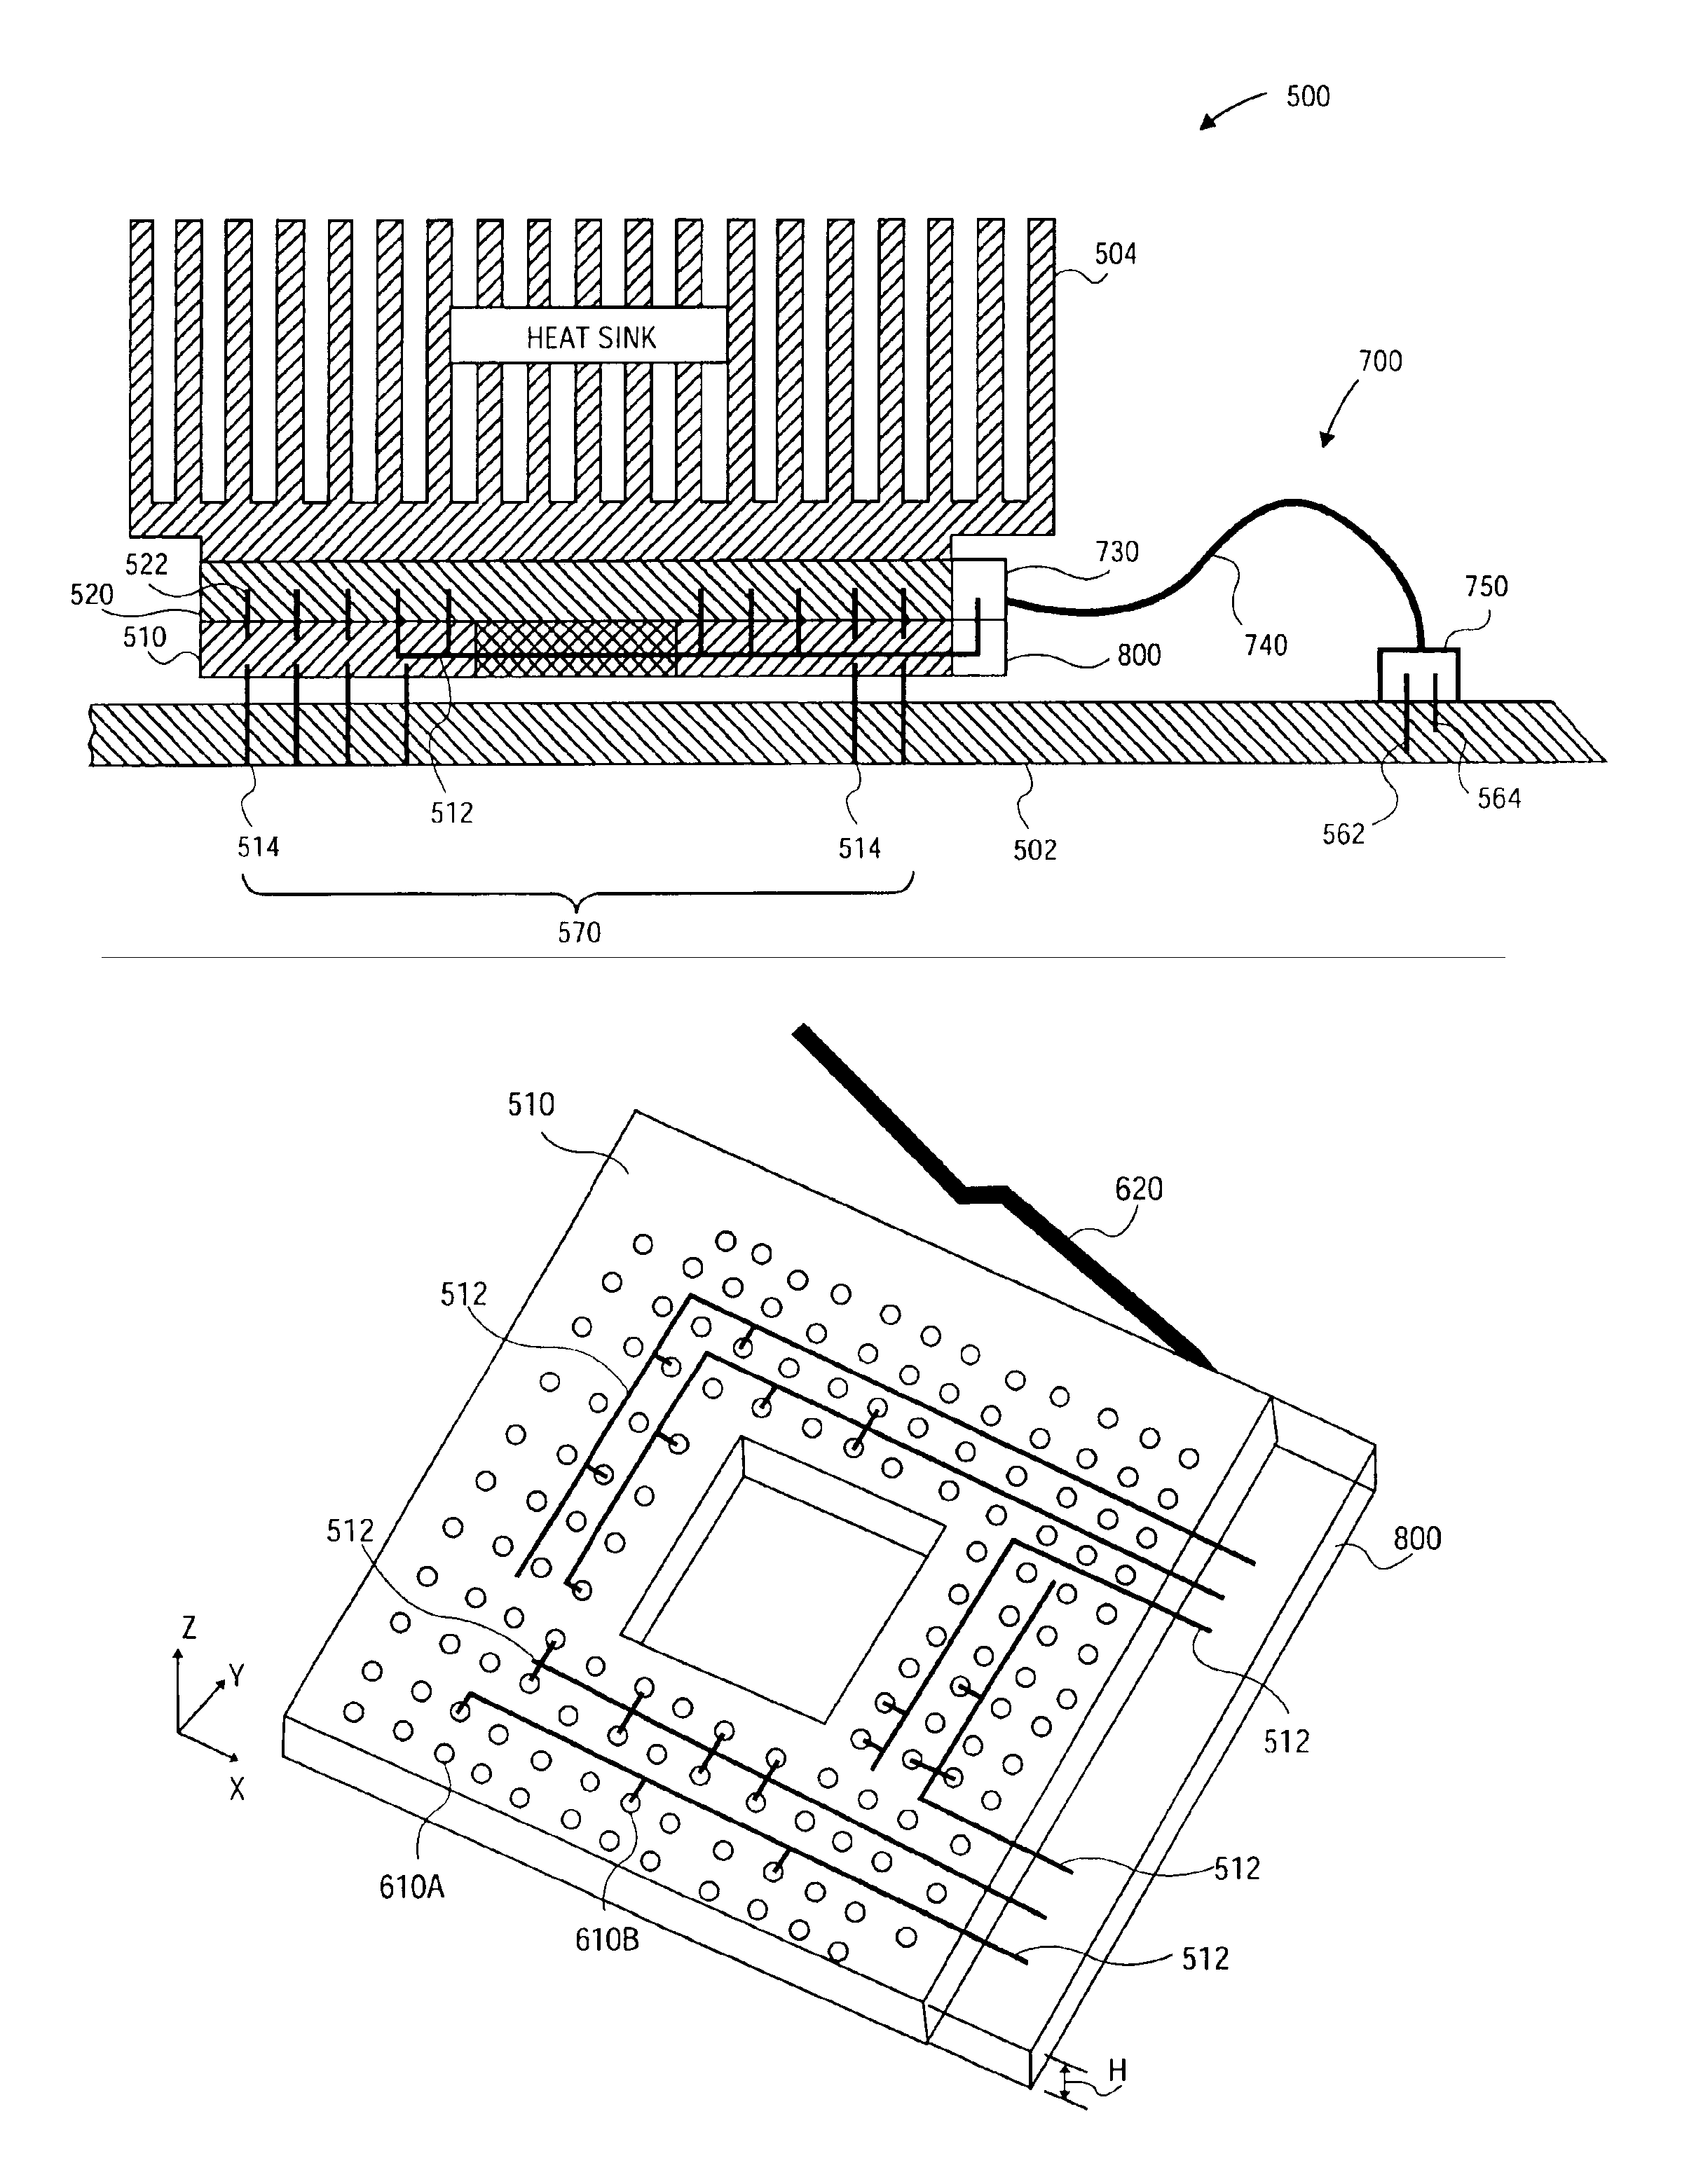 Array socket with a dedicated power/ground conductor bus